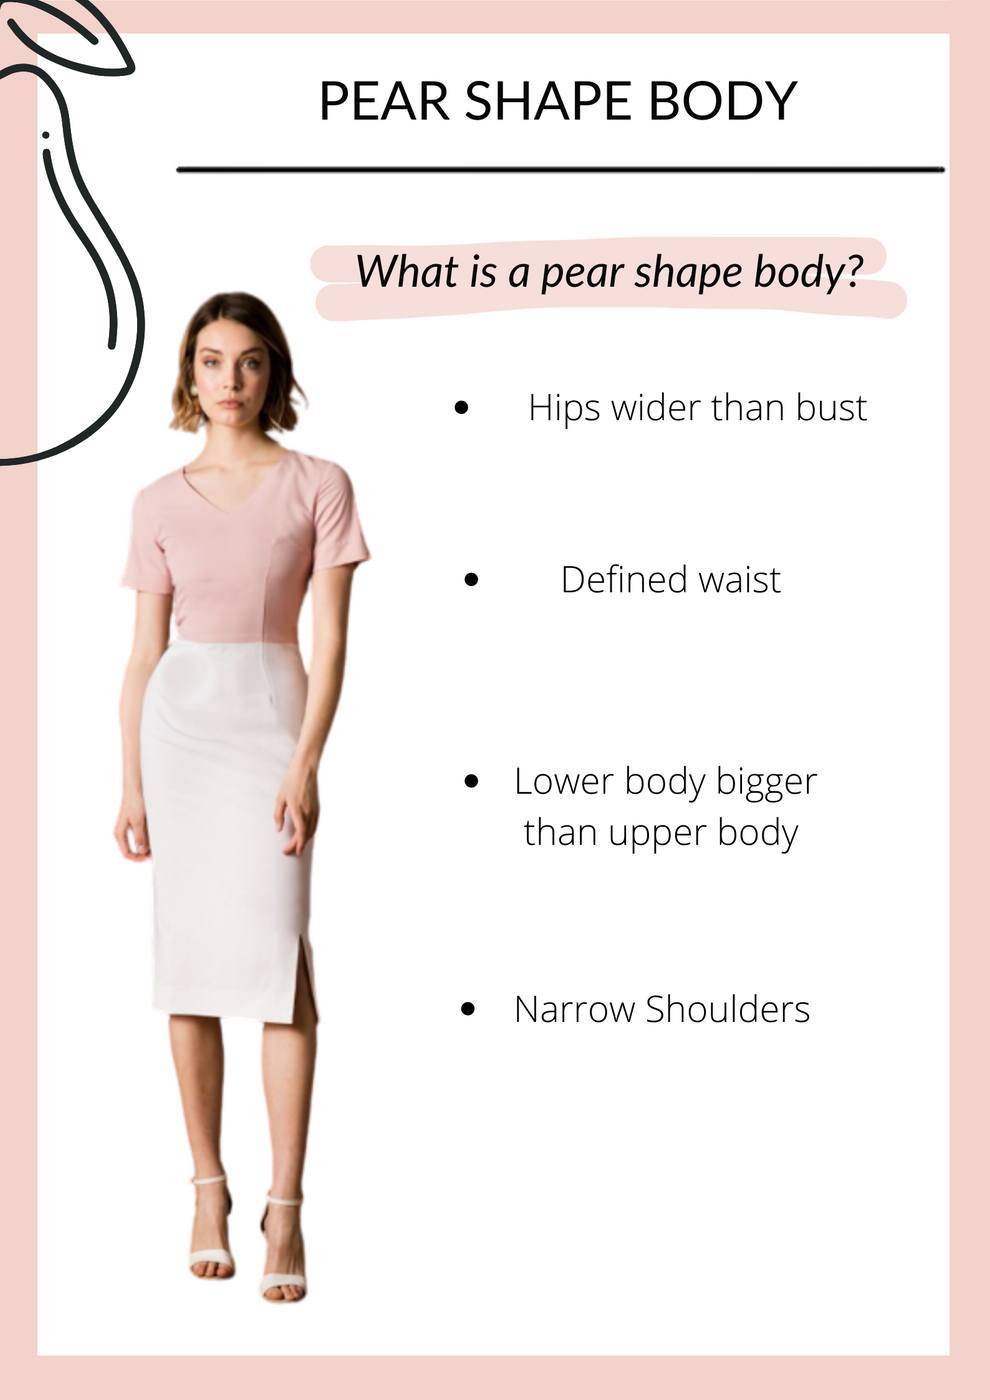 Will crop top and high waist skirt look good on pear shaped girl? - Quora